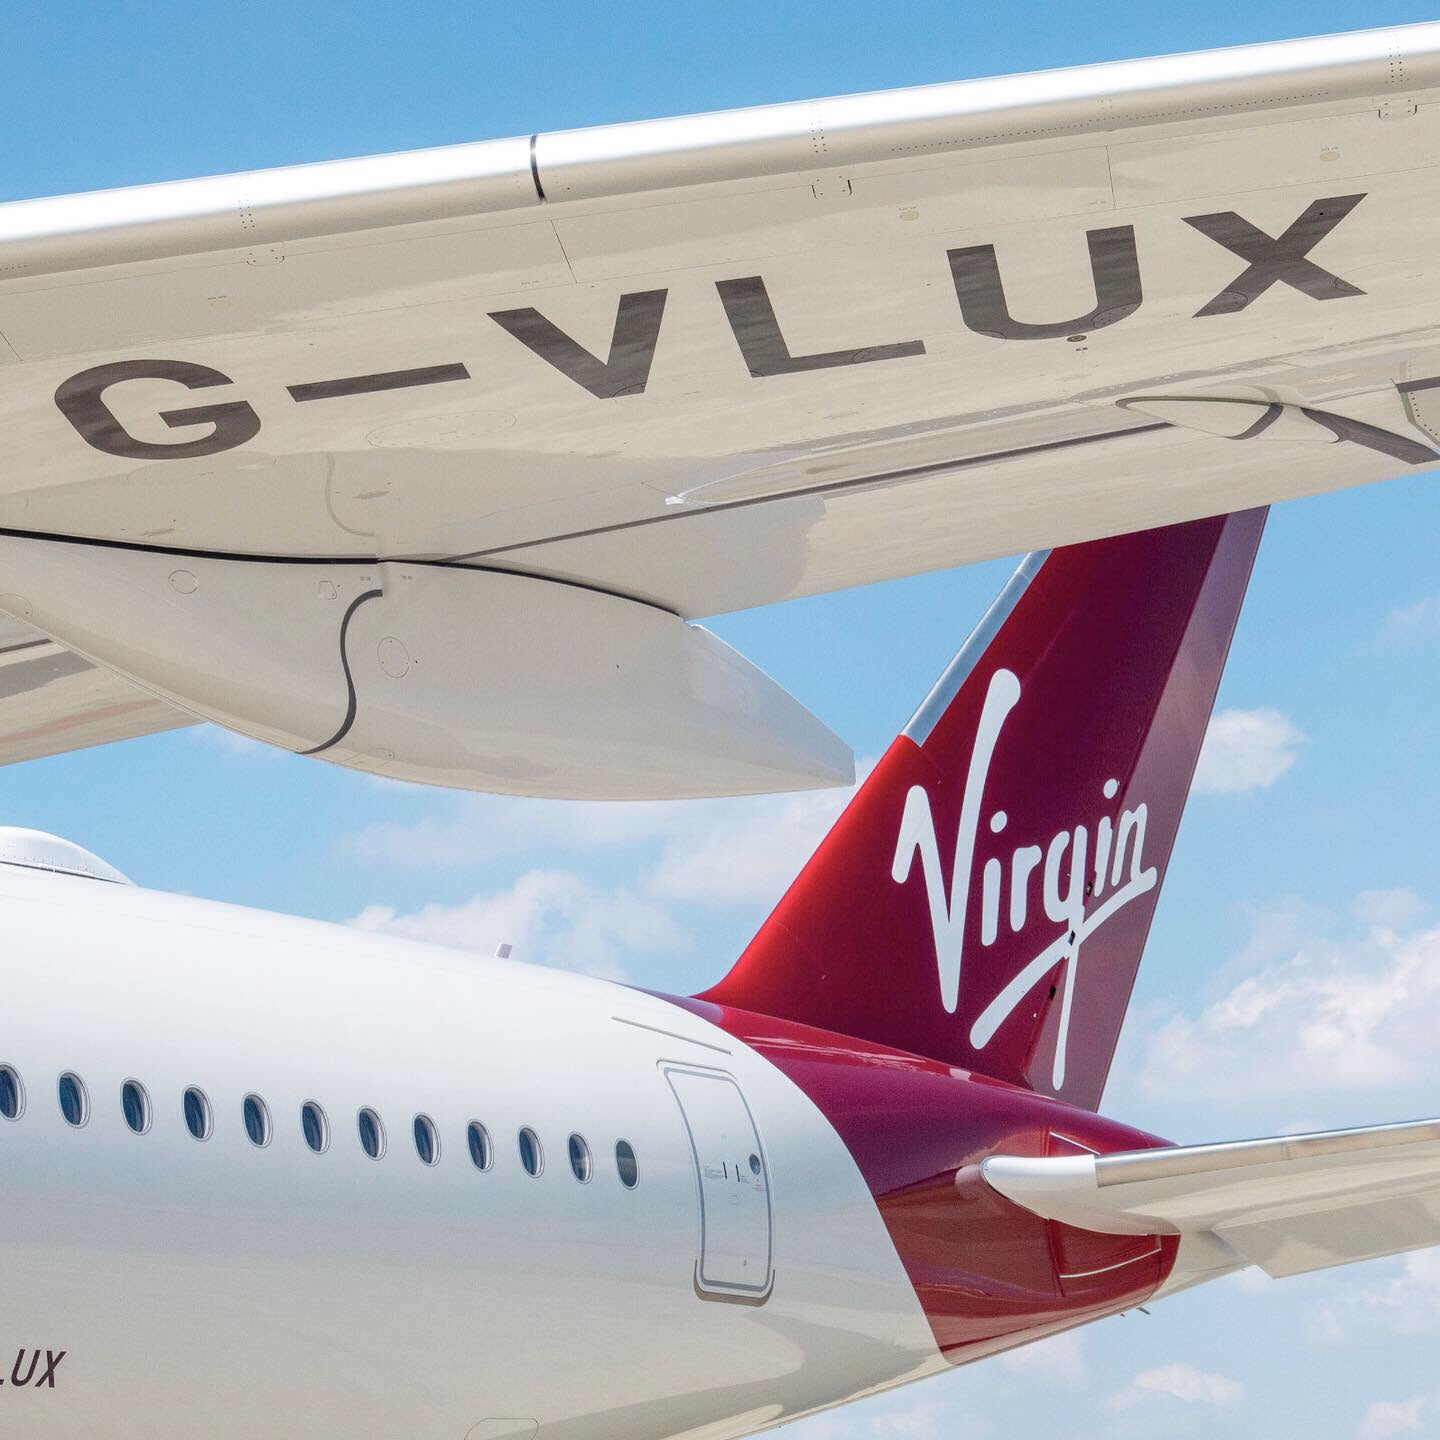 The tail fin and underwing of Virgin Atlantic's Airbus A350 G-VLUX